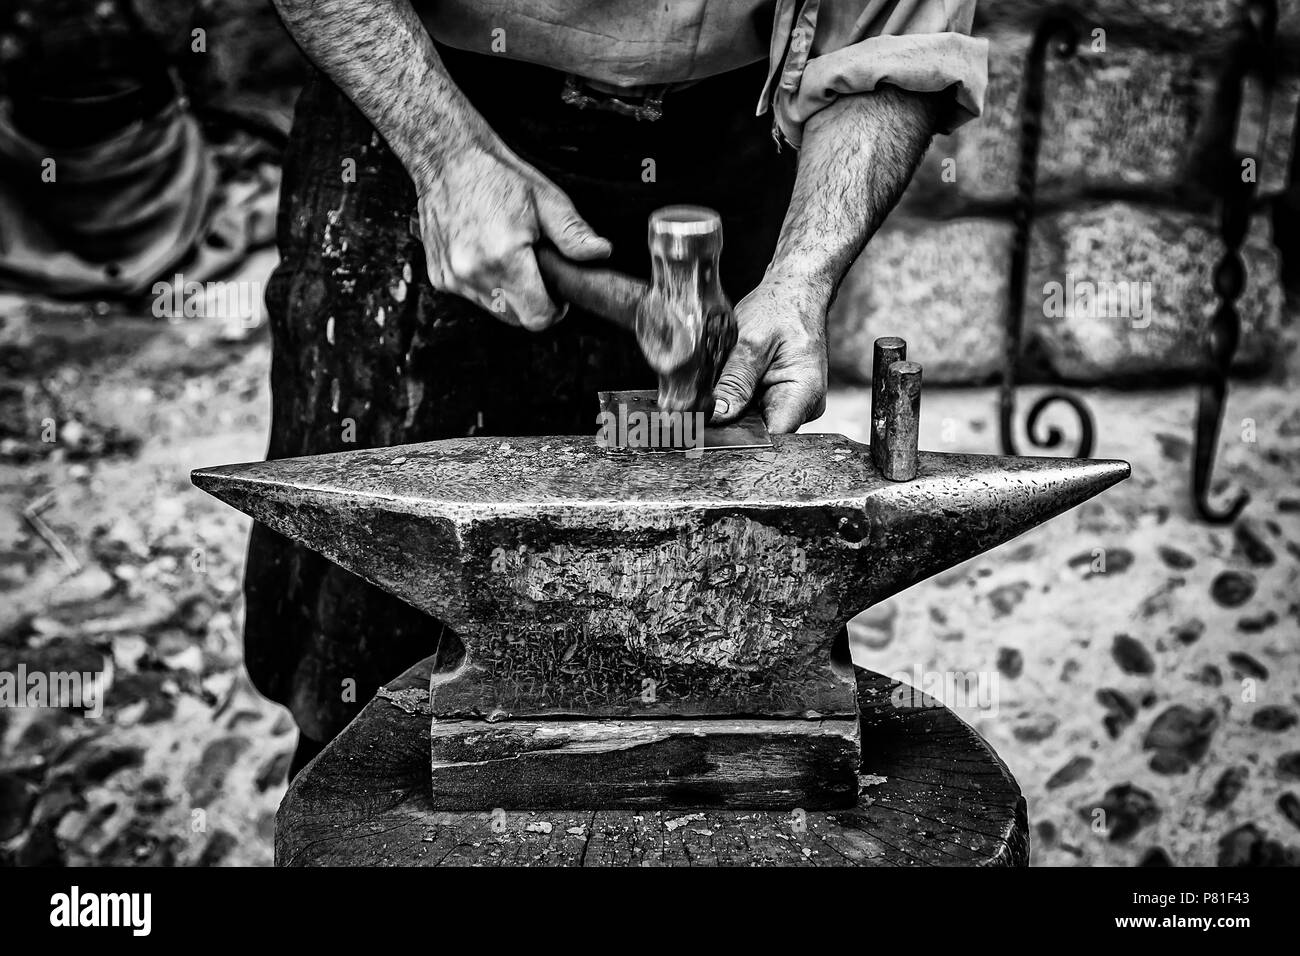 Hammer and anvil, detail of a forge, metal herramienas Stock Photo